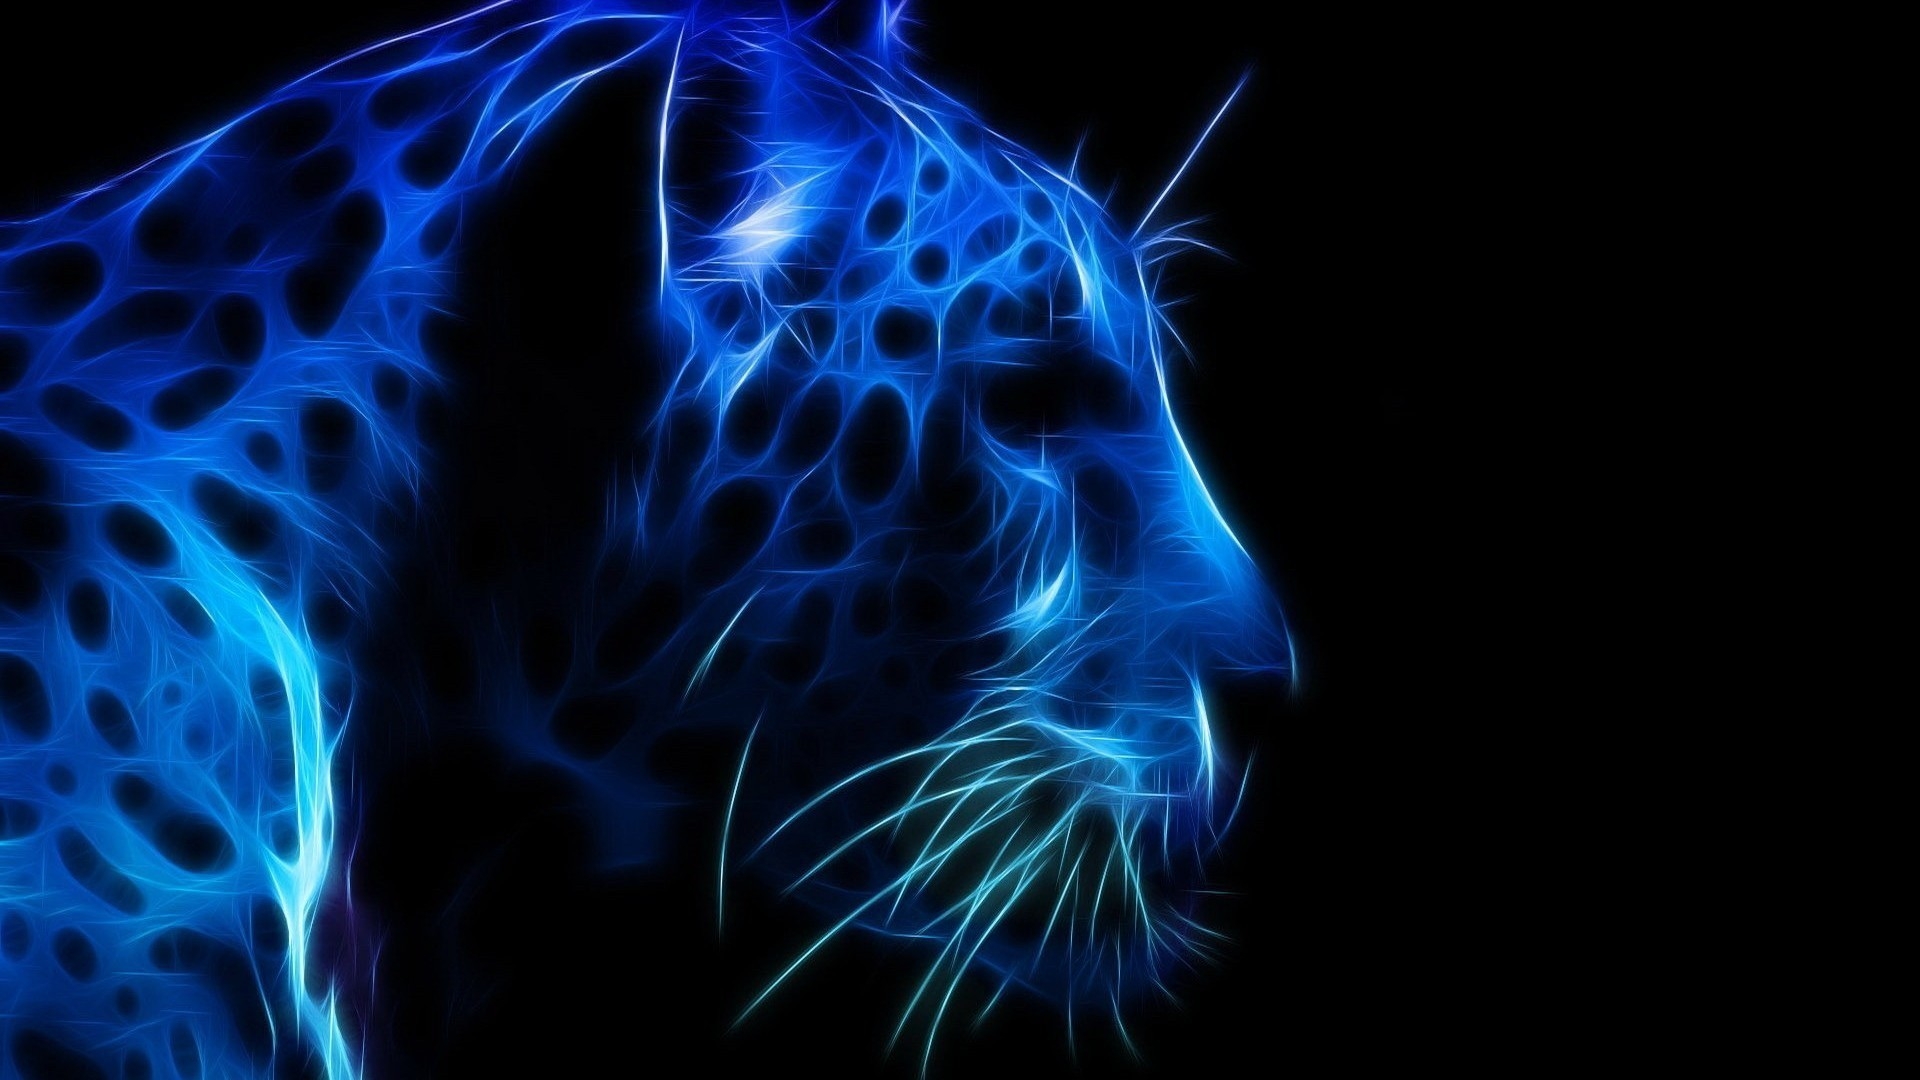 Leopard Profile Face for 1920 x 1080 HDTV 1080p resolution